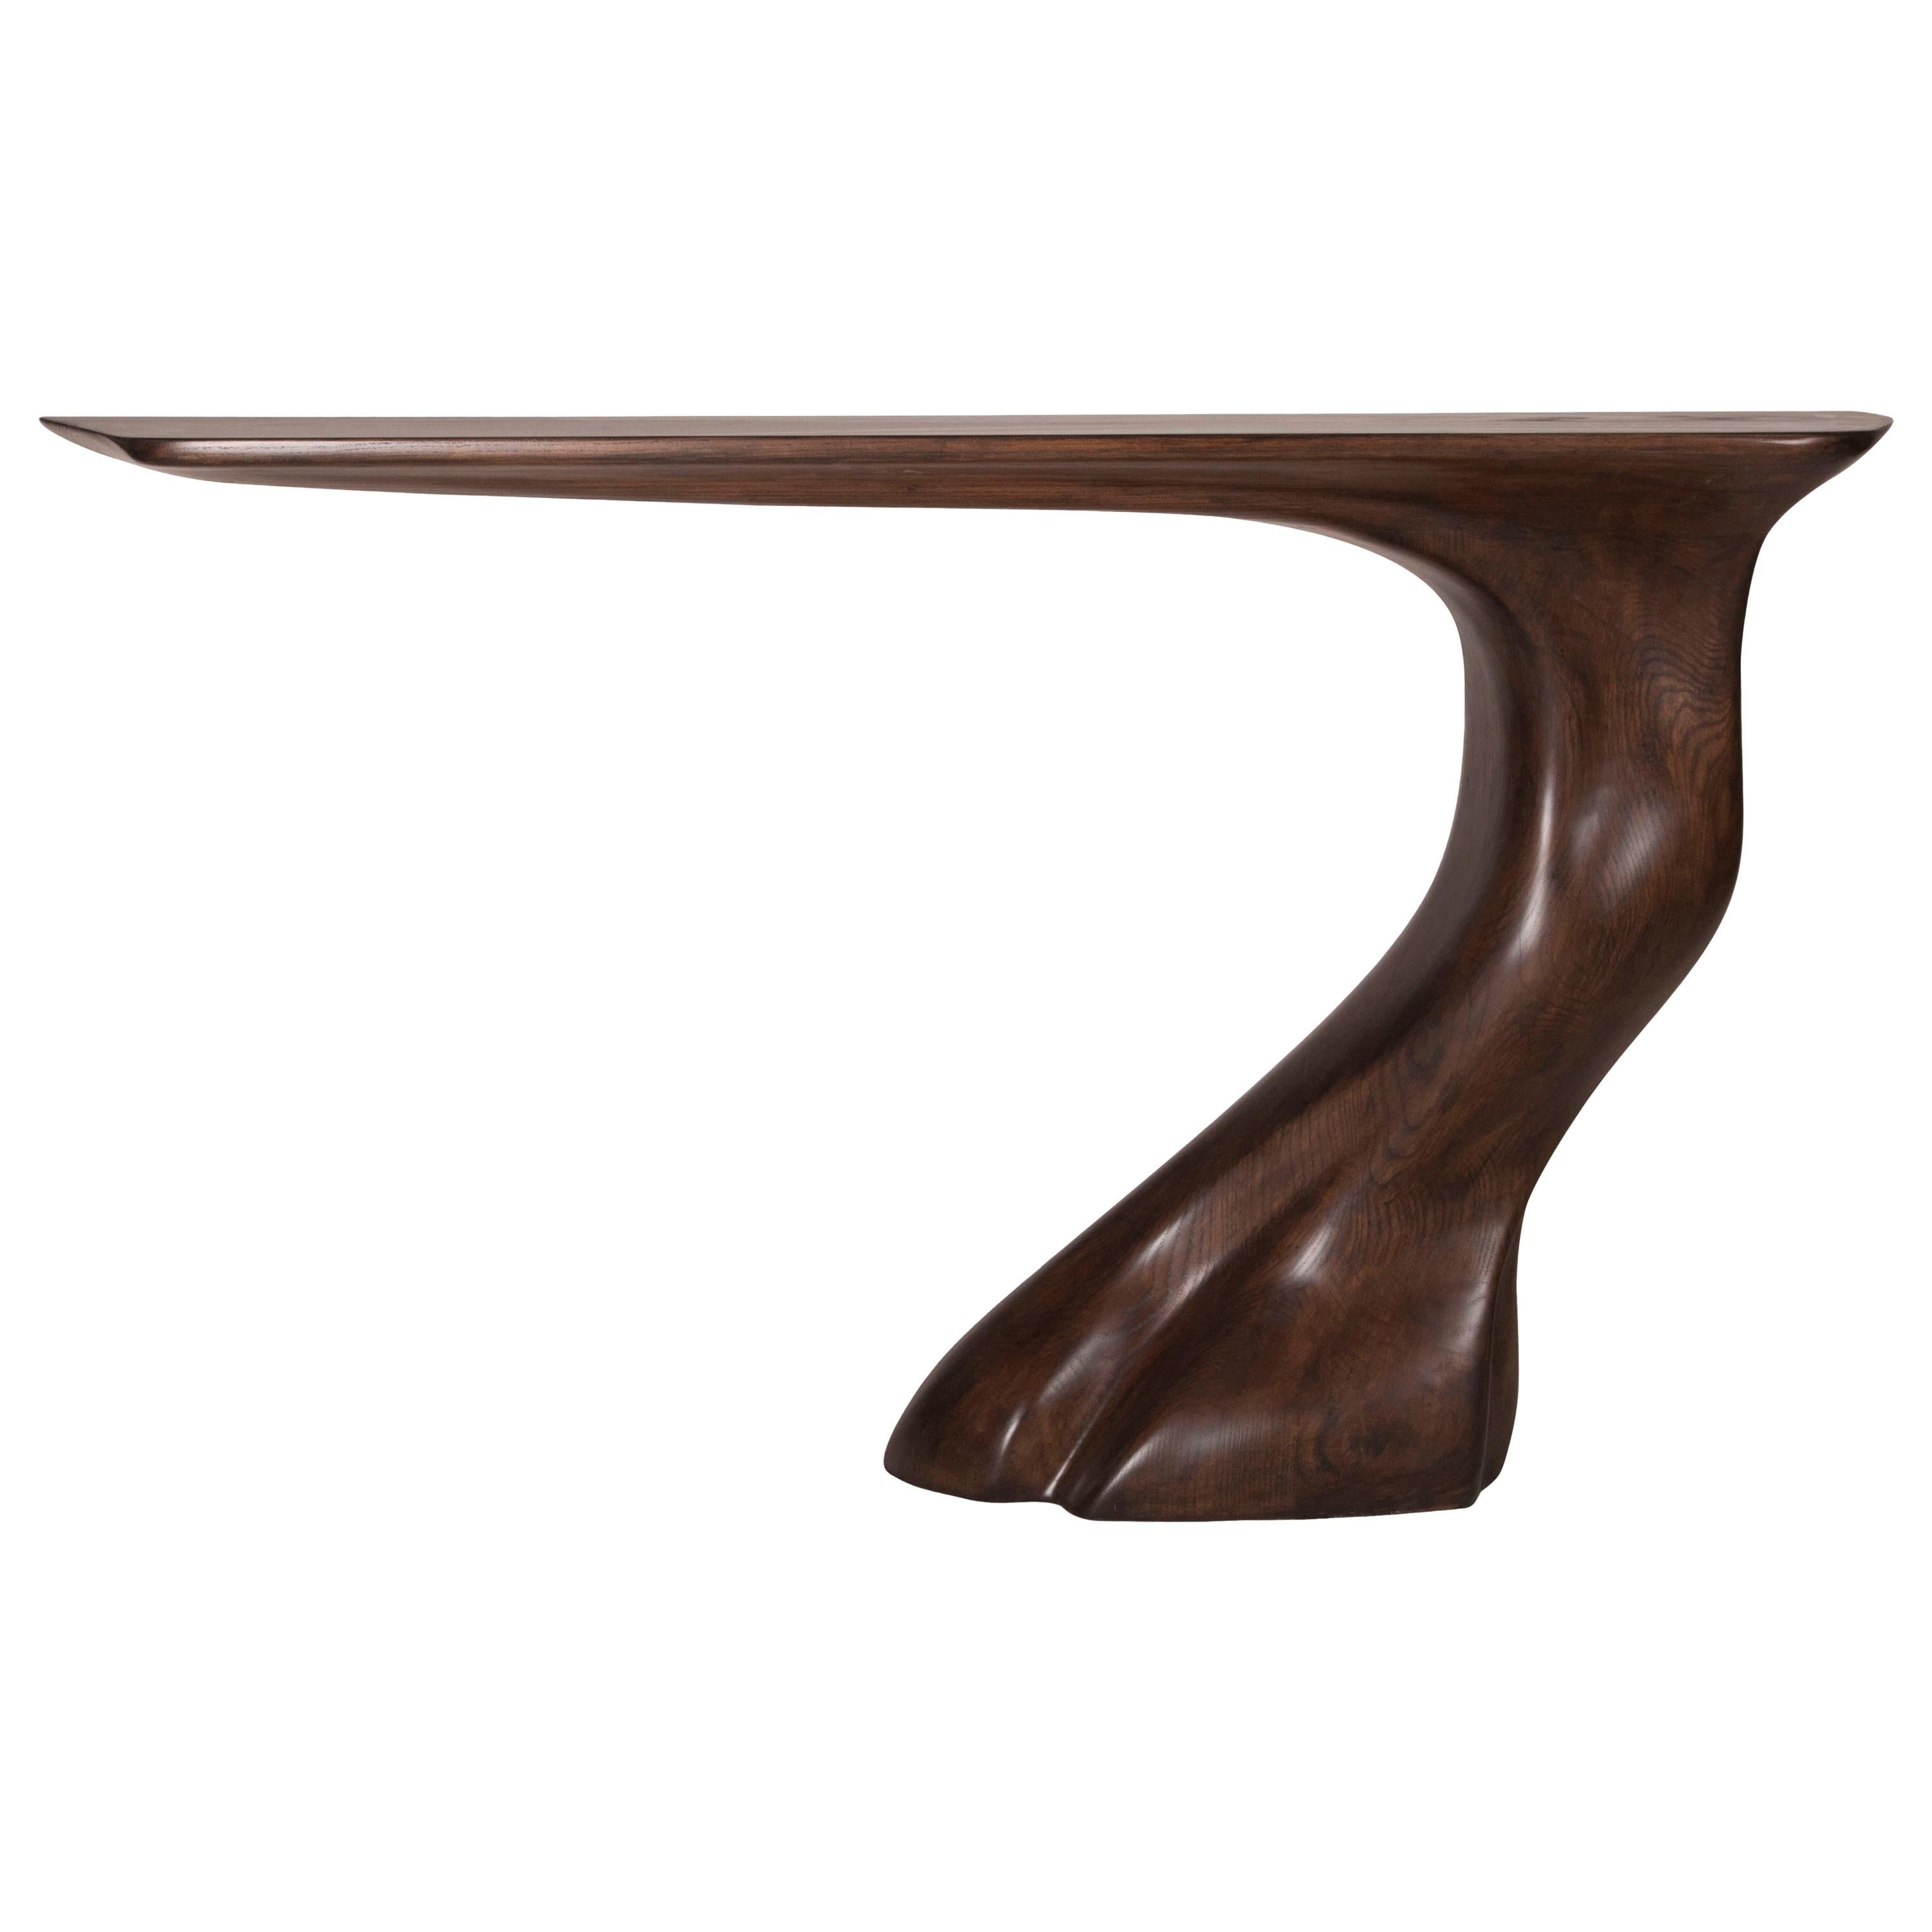 Amorph Frolic Console, Stained Graphite Walnut, Wall-Mounted